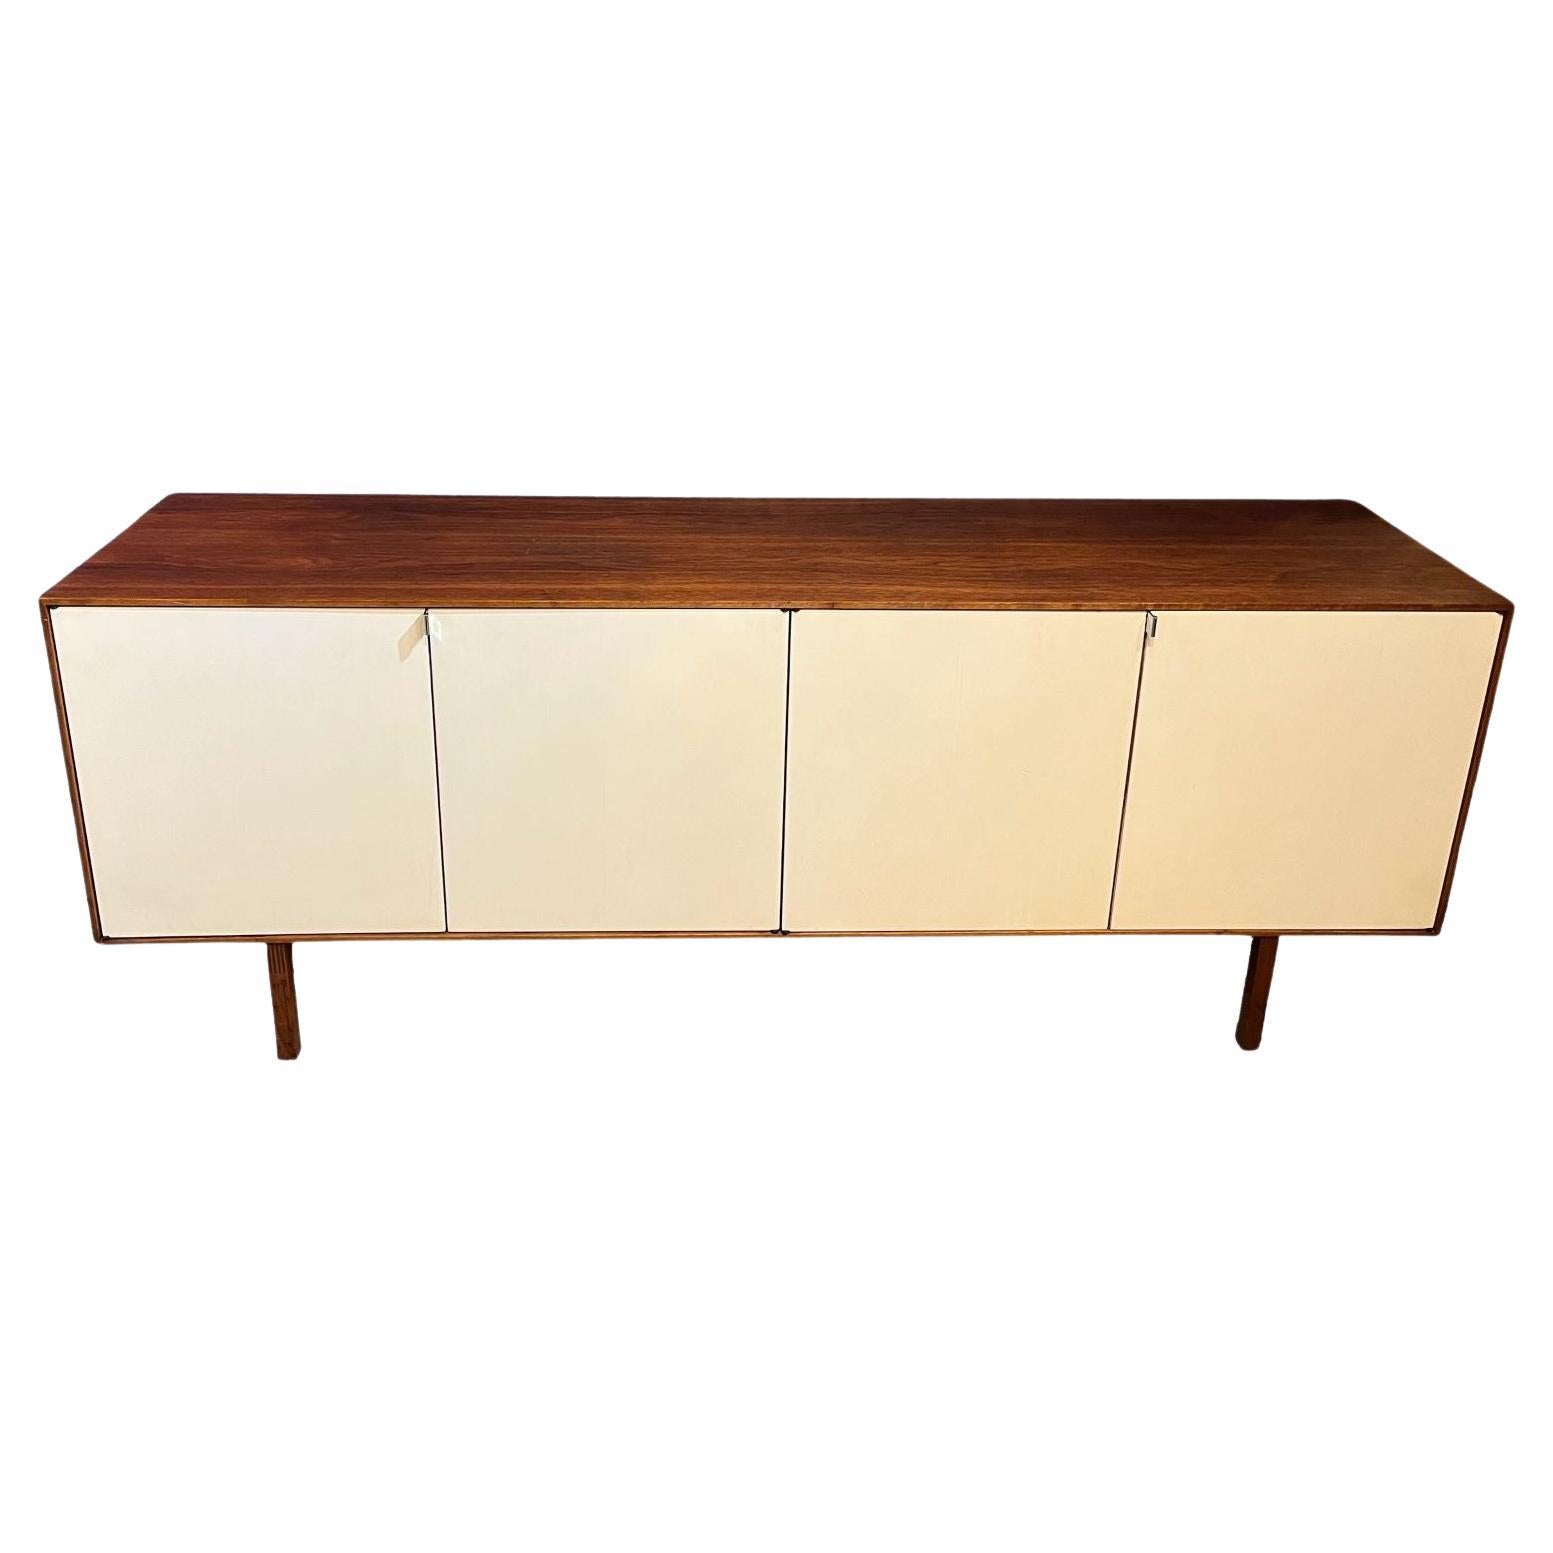 Early Florance Knoll For Knoll Associates Walnut And Cream Credenza C.1950 For Sale